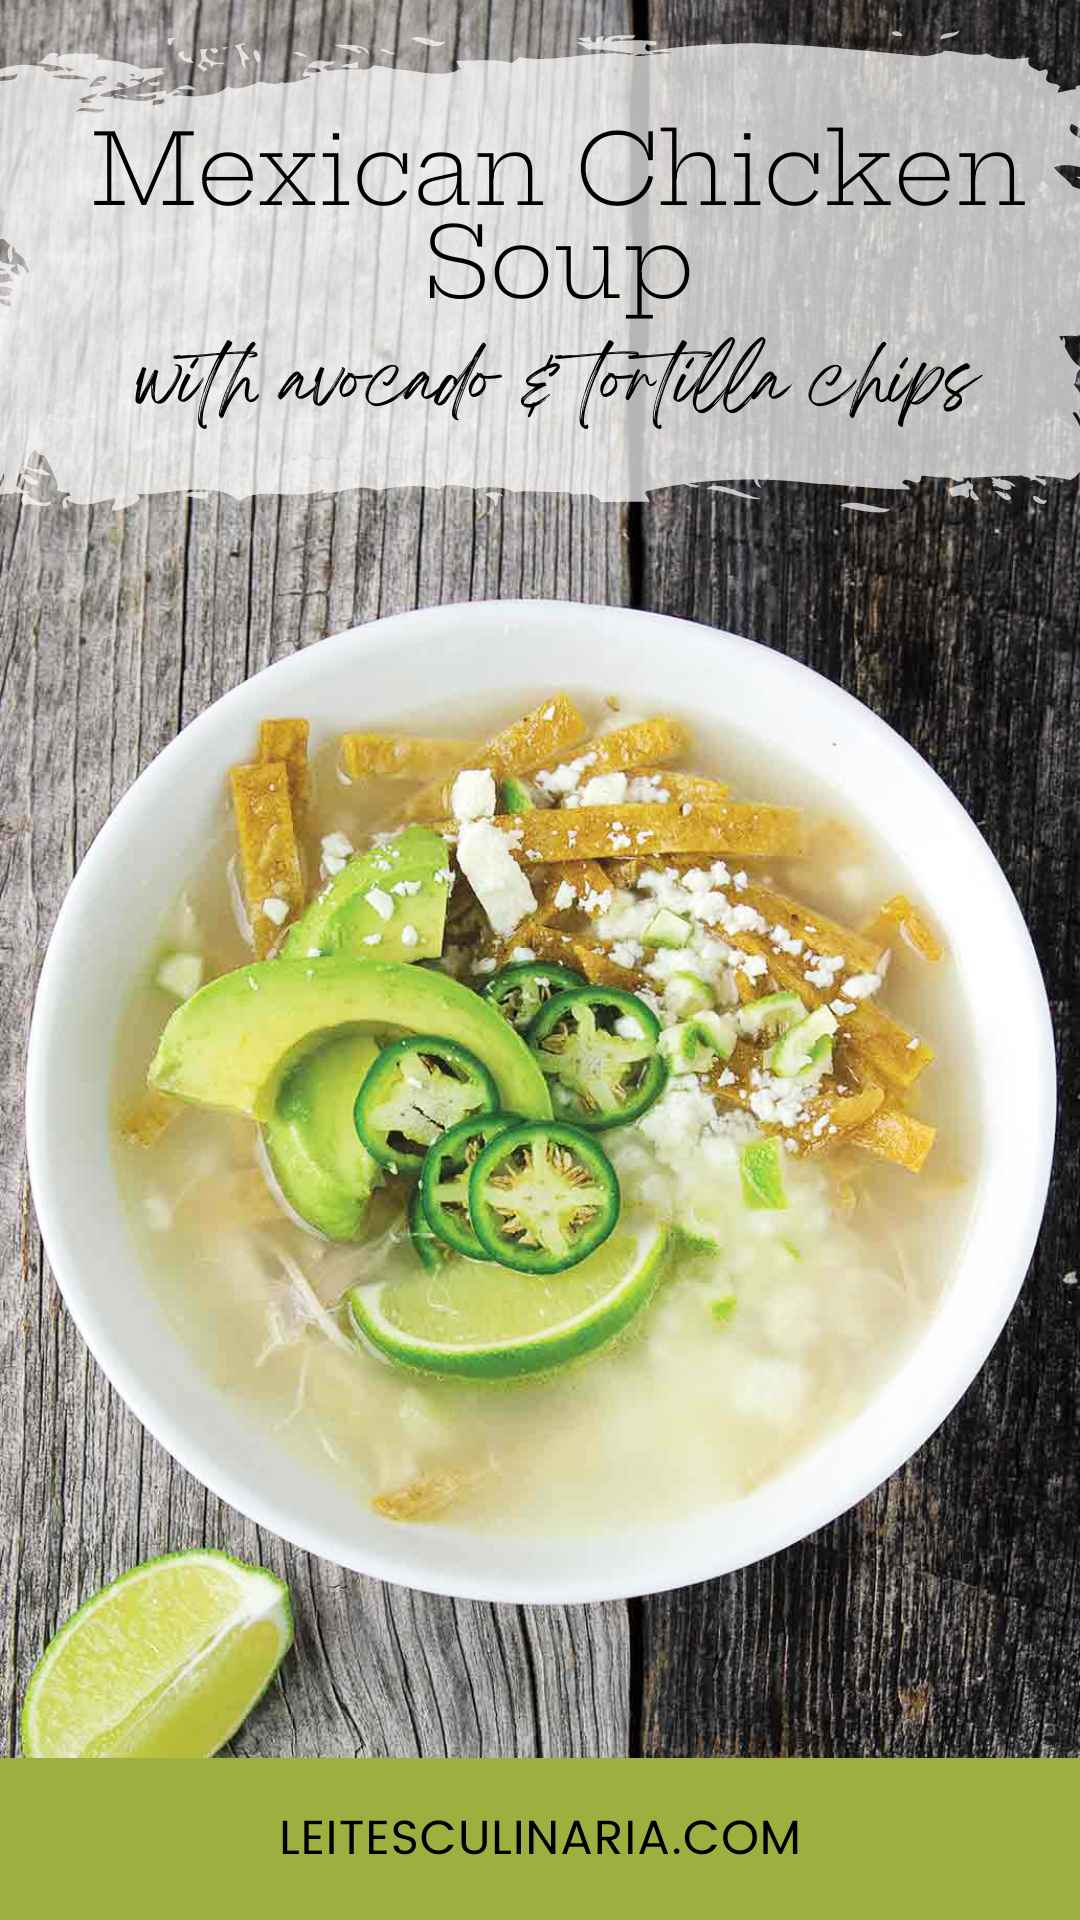 A white bowl filled with broth, avocado slices, lime wedges, cheese, and tortilla strips.